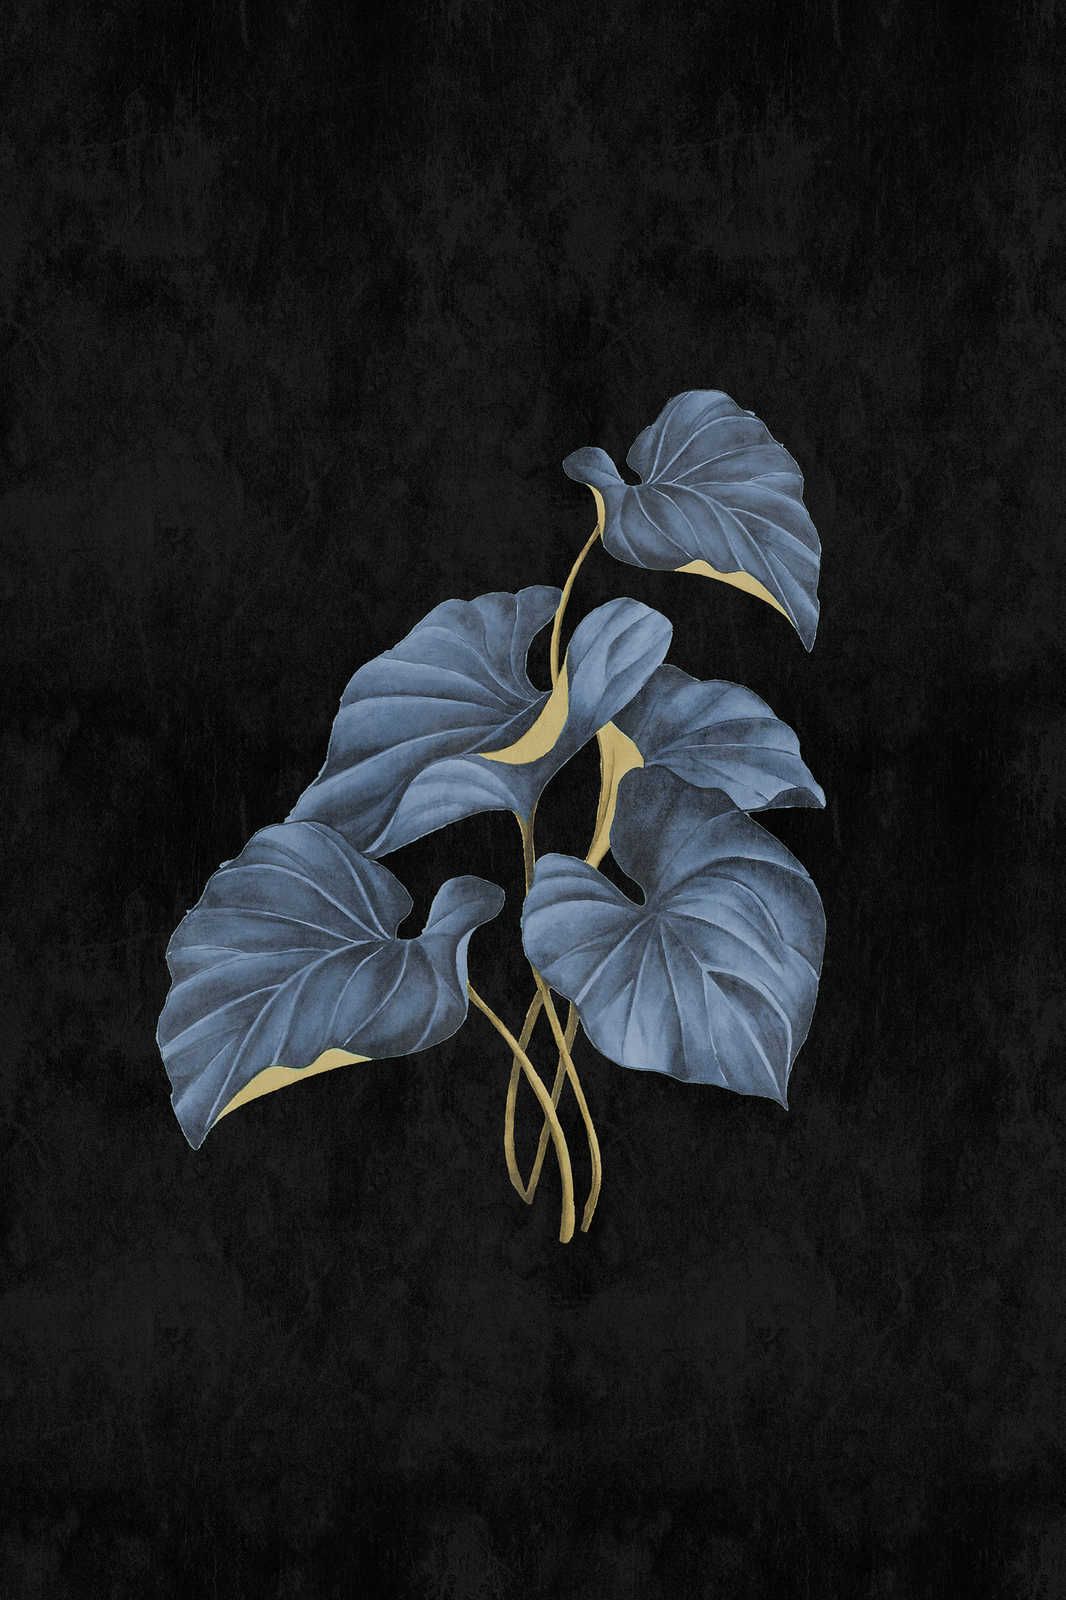             Fiji 1 - Black Canvas painting Blue Leaves with Gold Accent - 0.60 m x 0.90 m
        